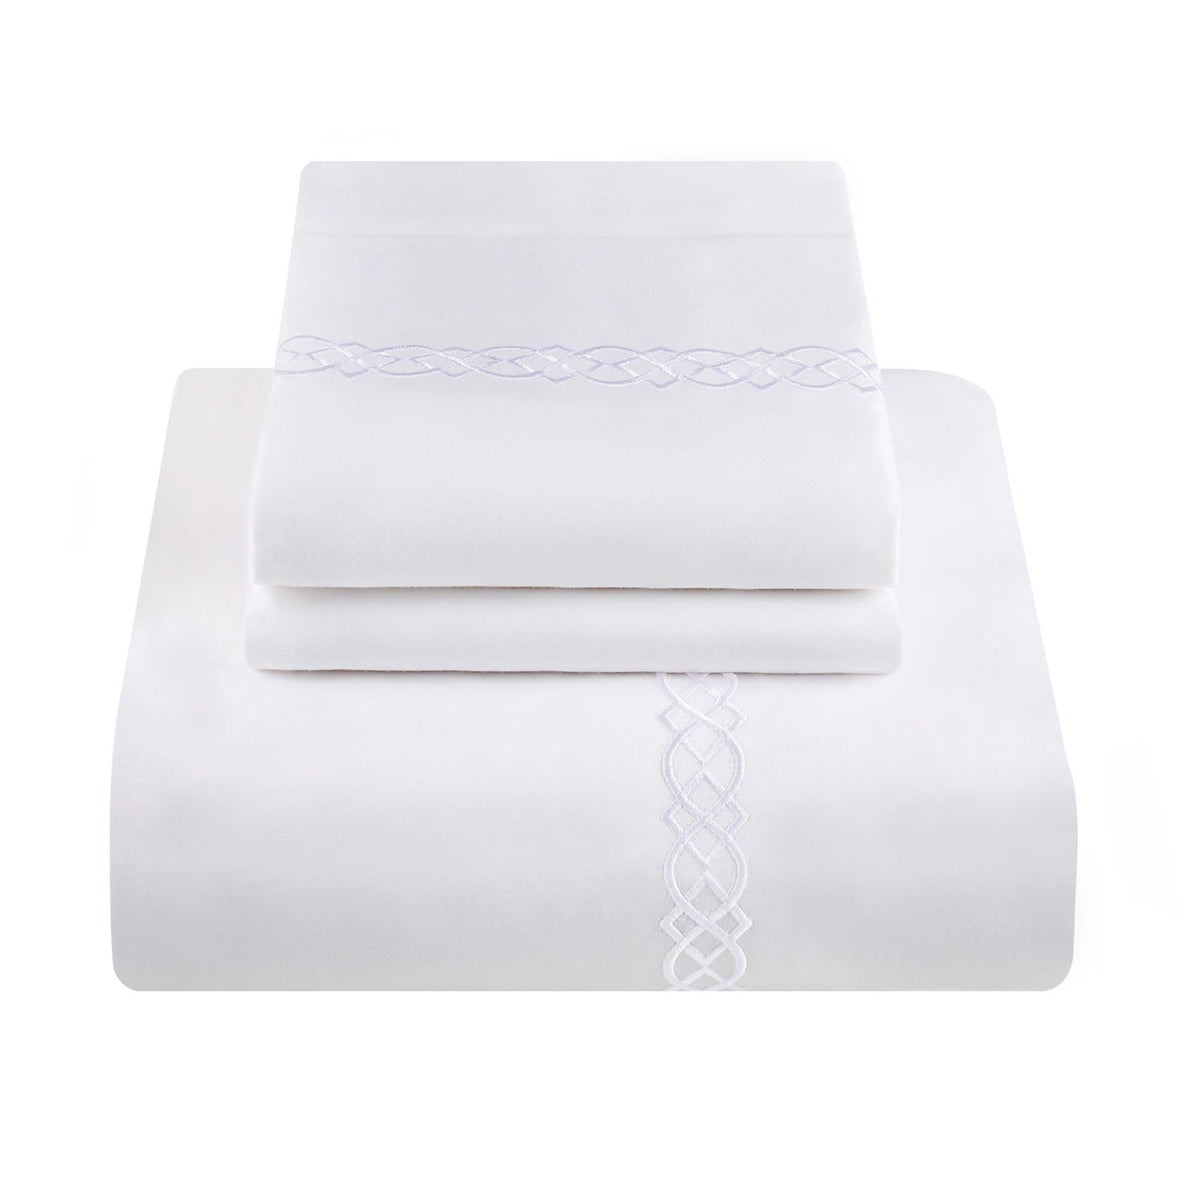 Superior Egyptian Cotton 1000 Thread Count Embroidered Duvet Cover Set